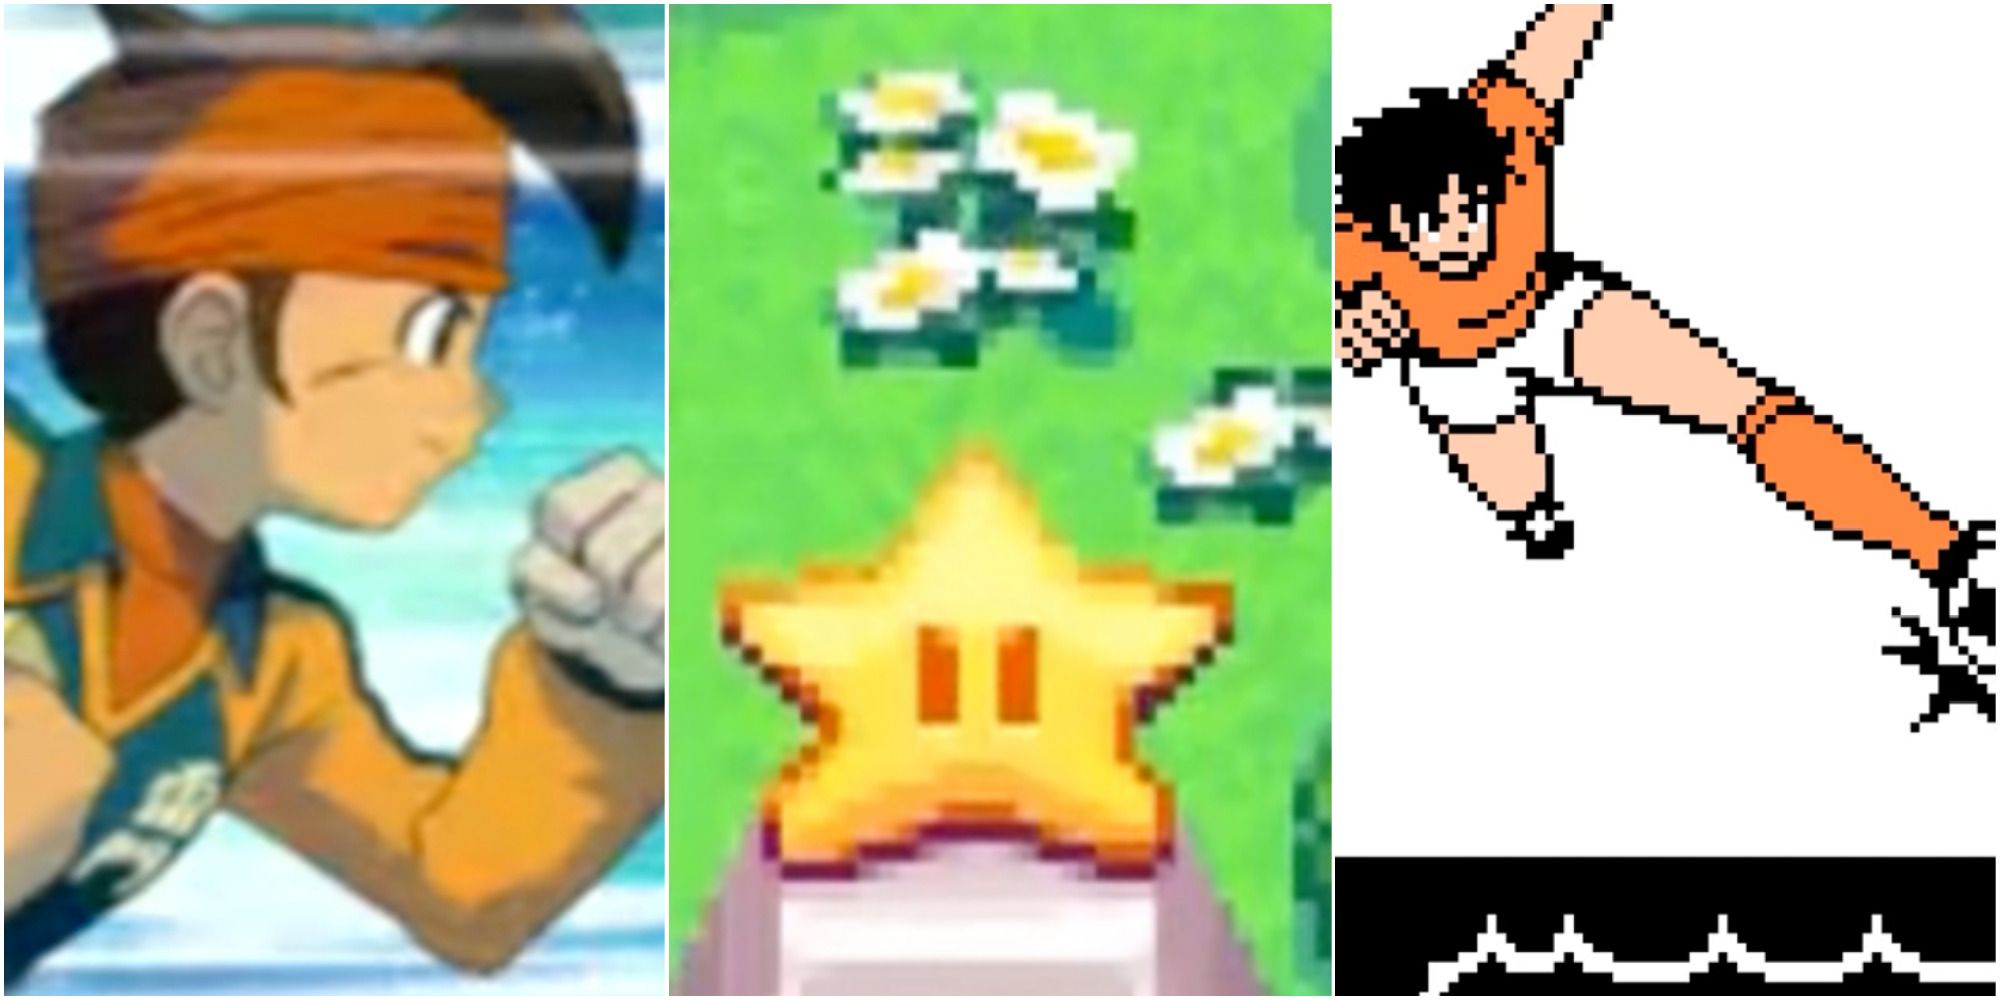 A collage of images from Inazuma Eleven, Mario Tennis: Power Tour, and Captain Tsubasa 2: Super Striker